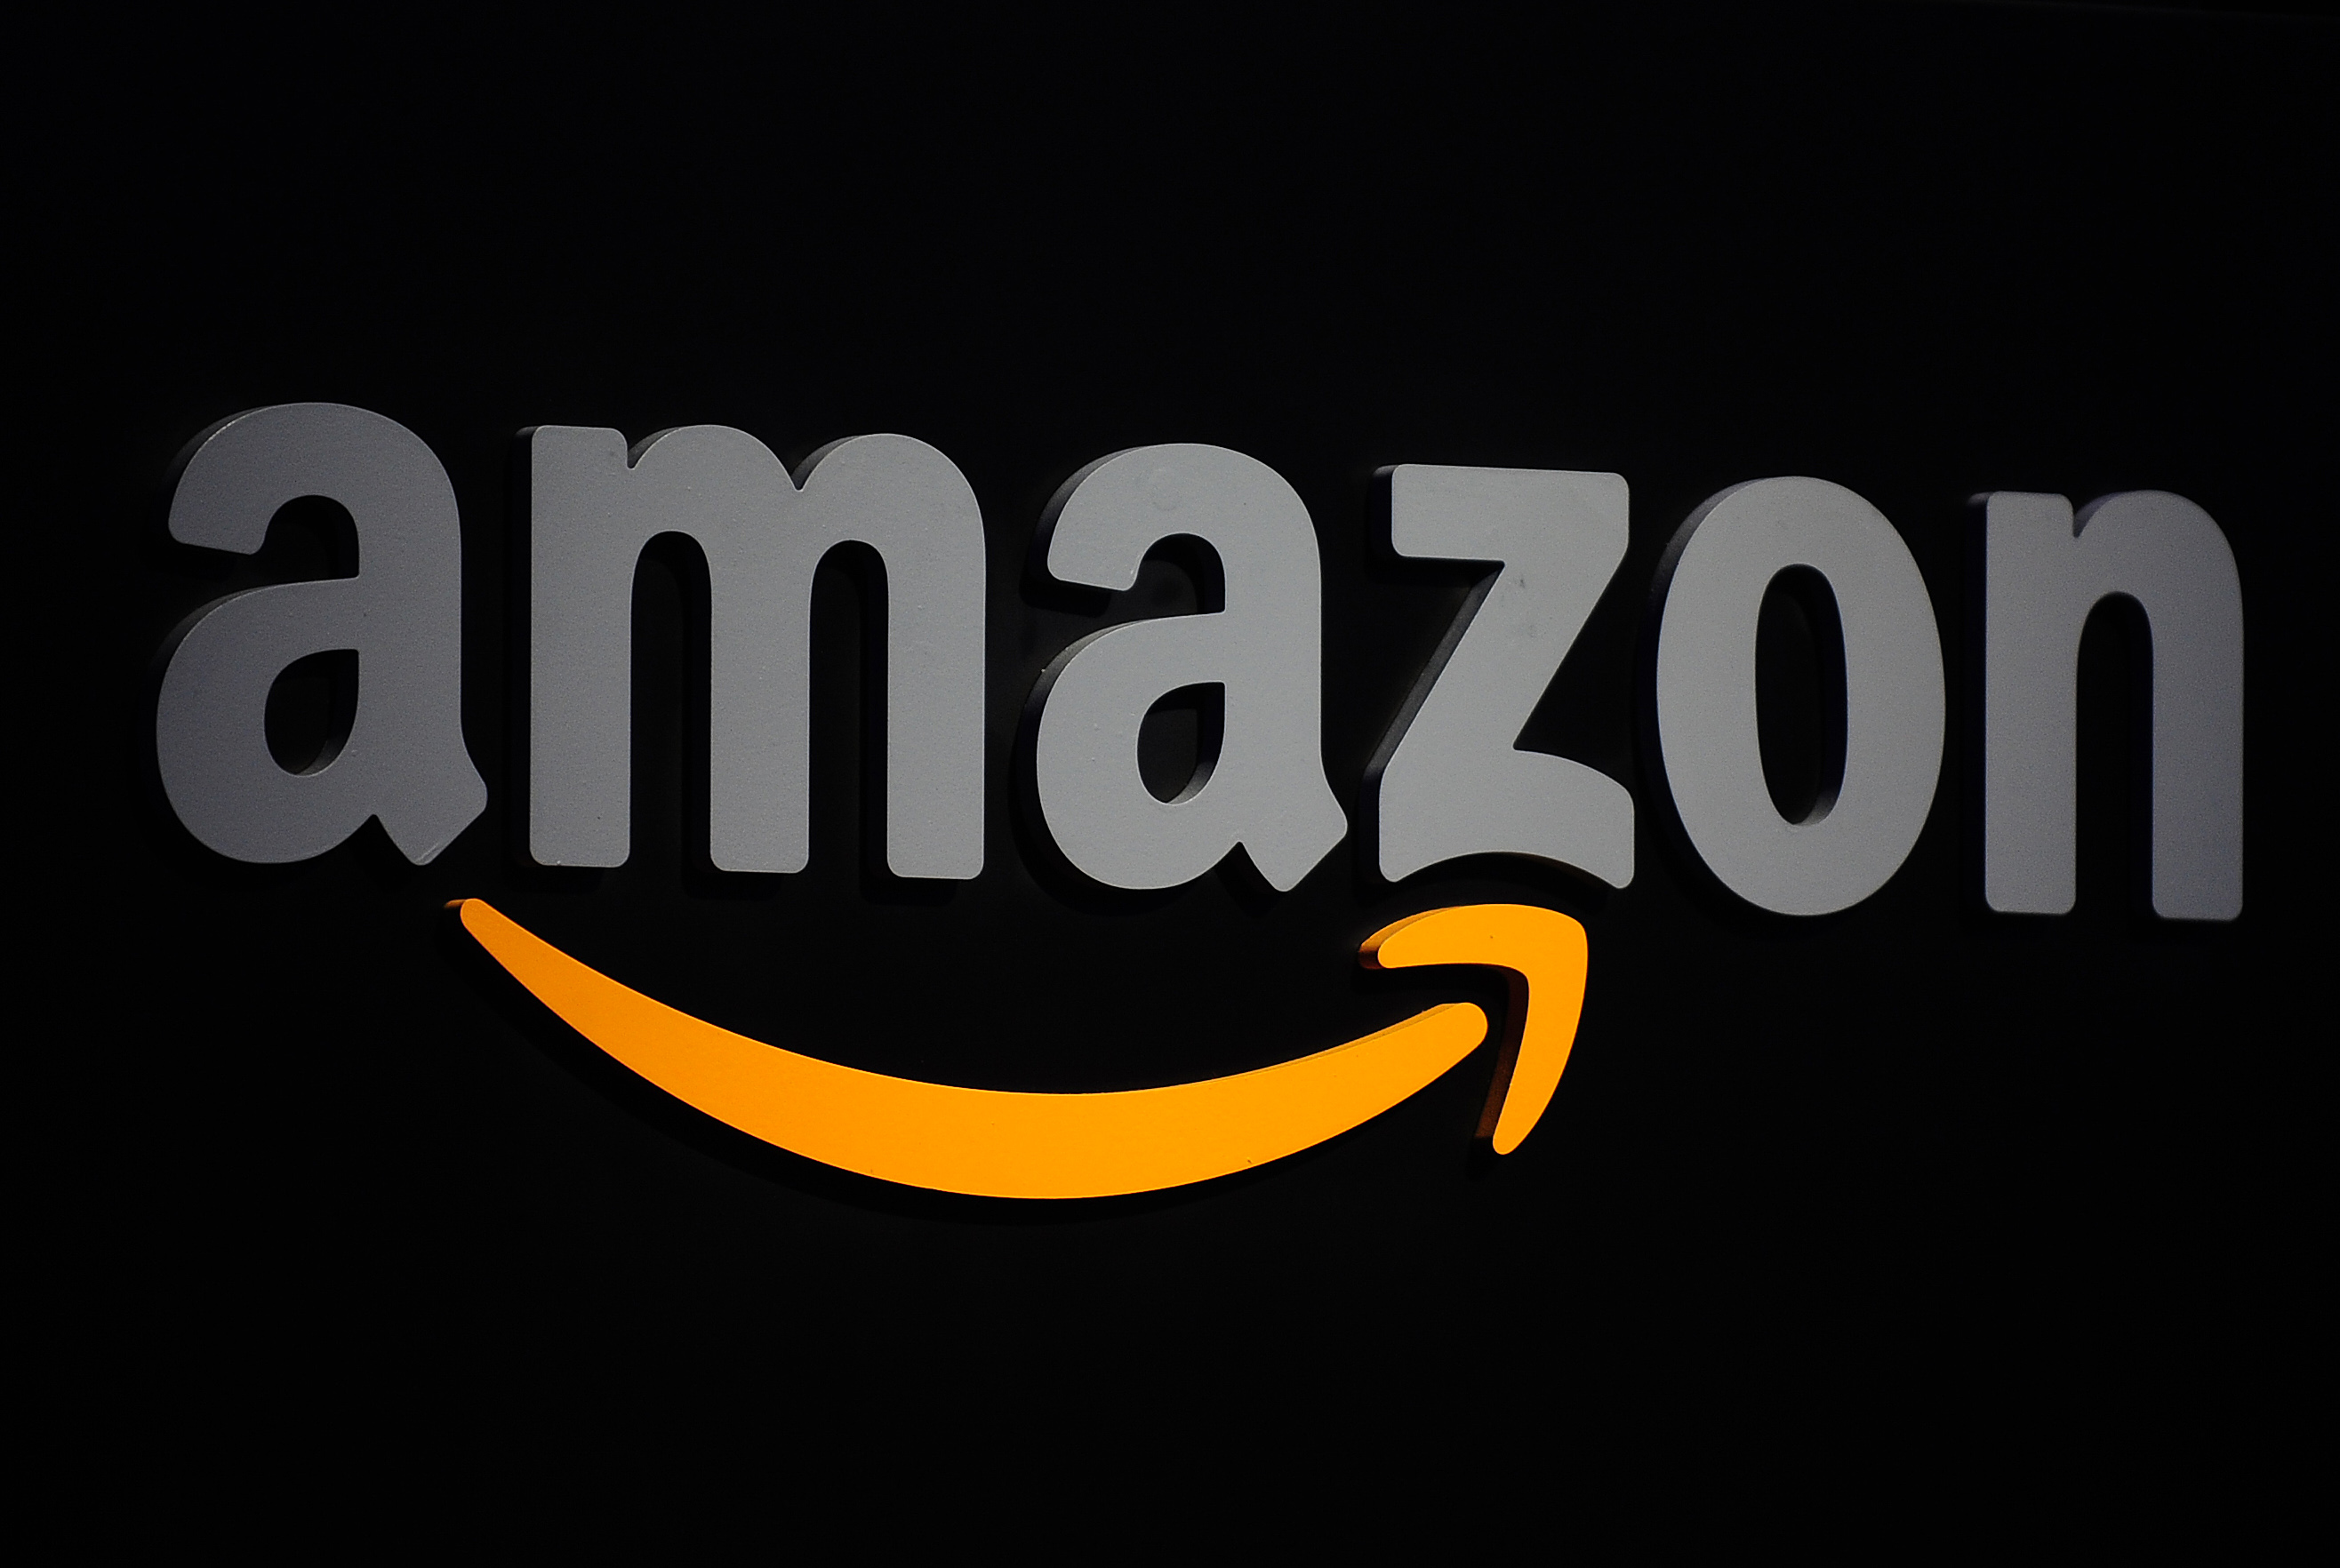 The Amazon logo is seen on a podium during a press conference in New York, September 28, 2011. (Emmanuel Dunand&mdash;AFP/Getty Images)